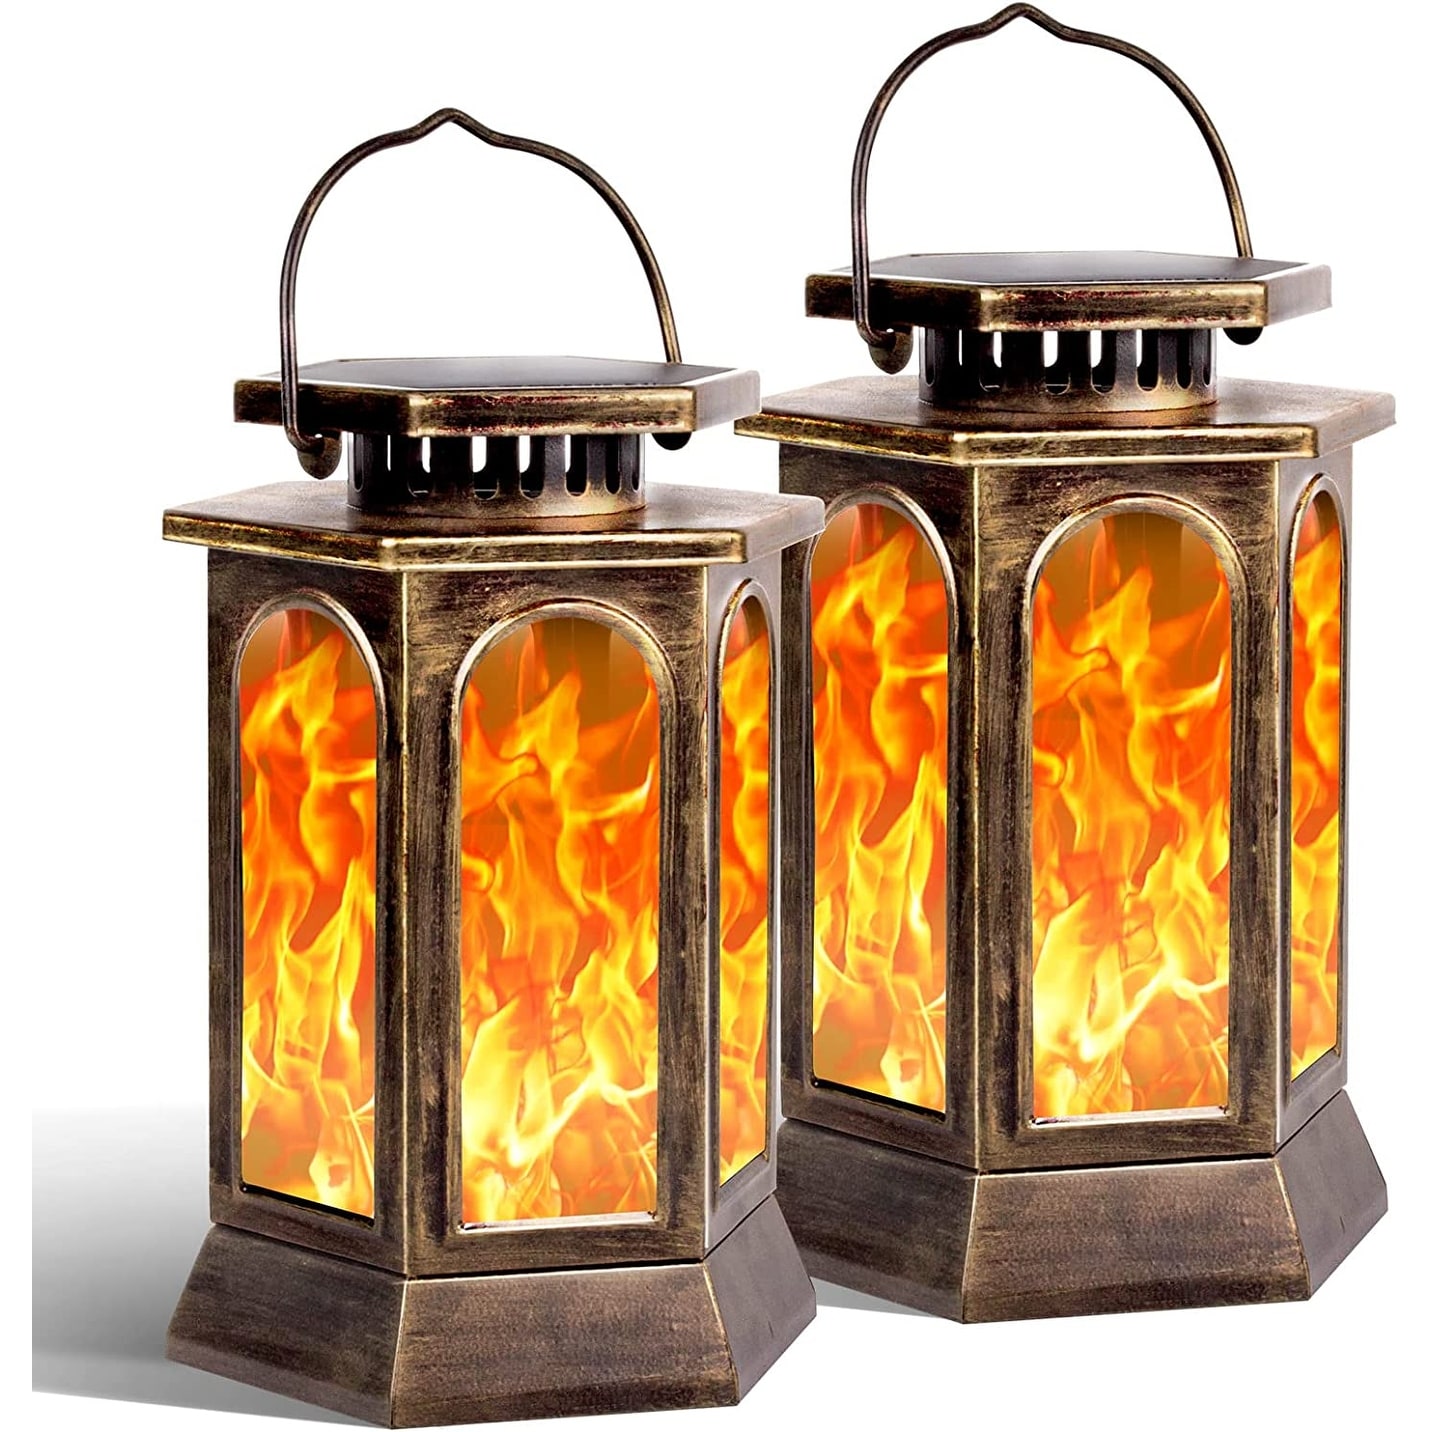 WaLensee 8.7'' Bronze Solar Lights Outdoor With Flickering Flame Metal Solar  Powered Lanterns Hanging Light (Set of 2) Bed Bath  Beyond 37920395